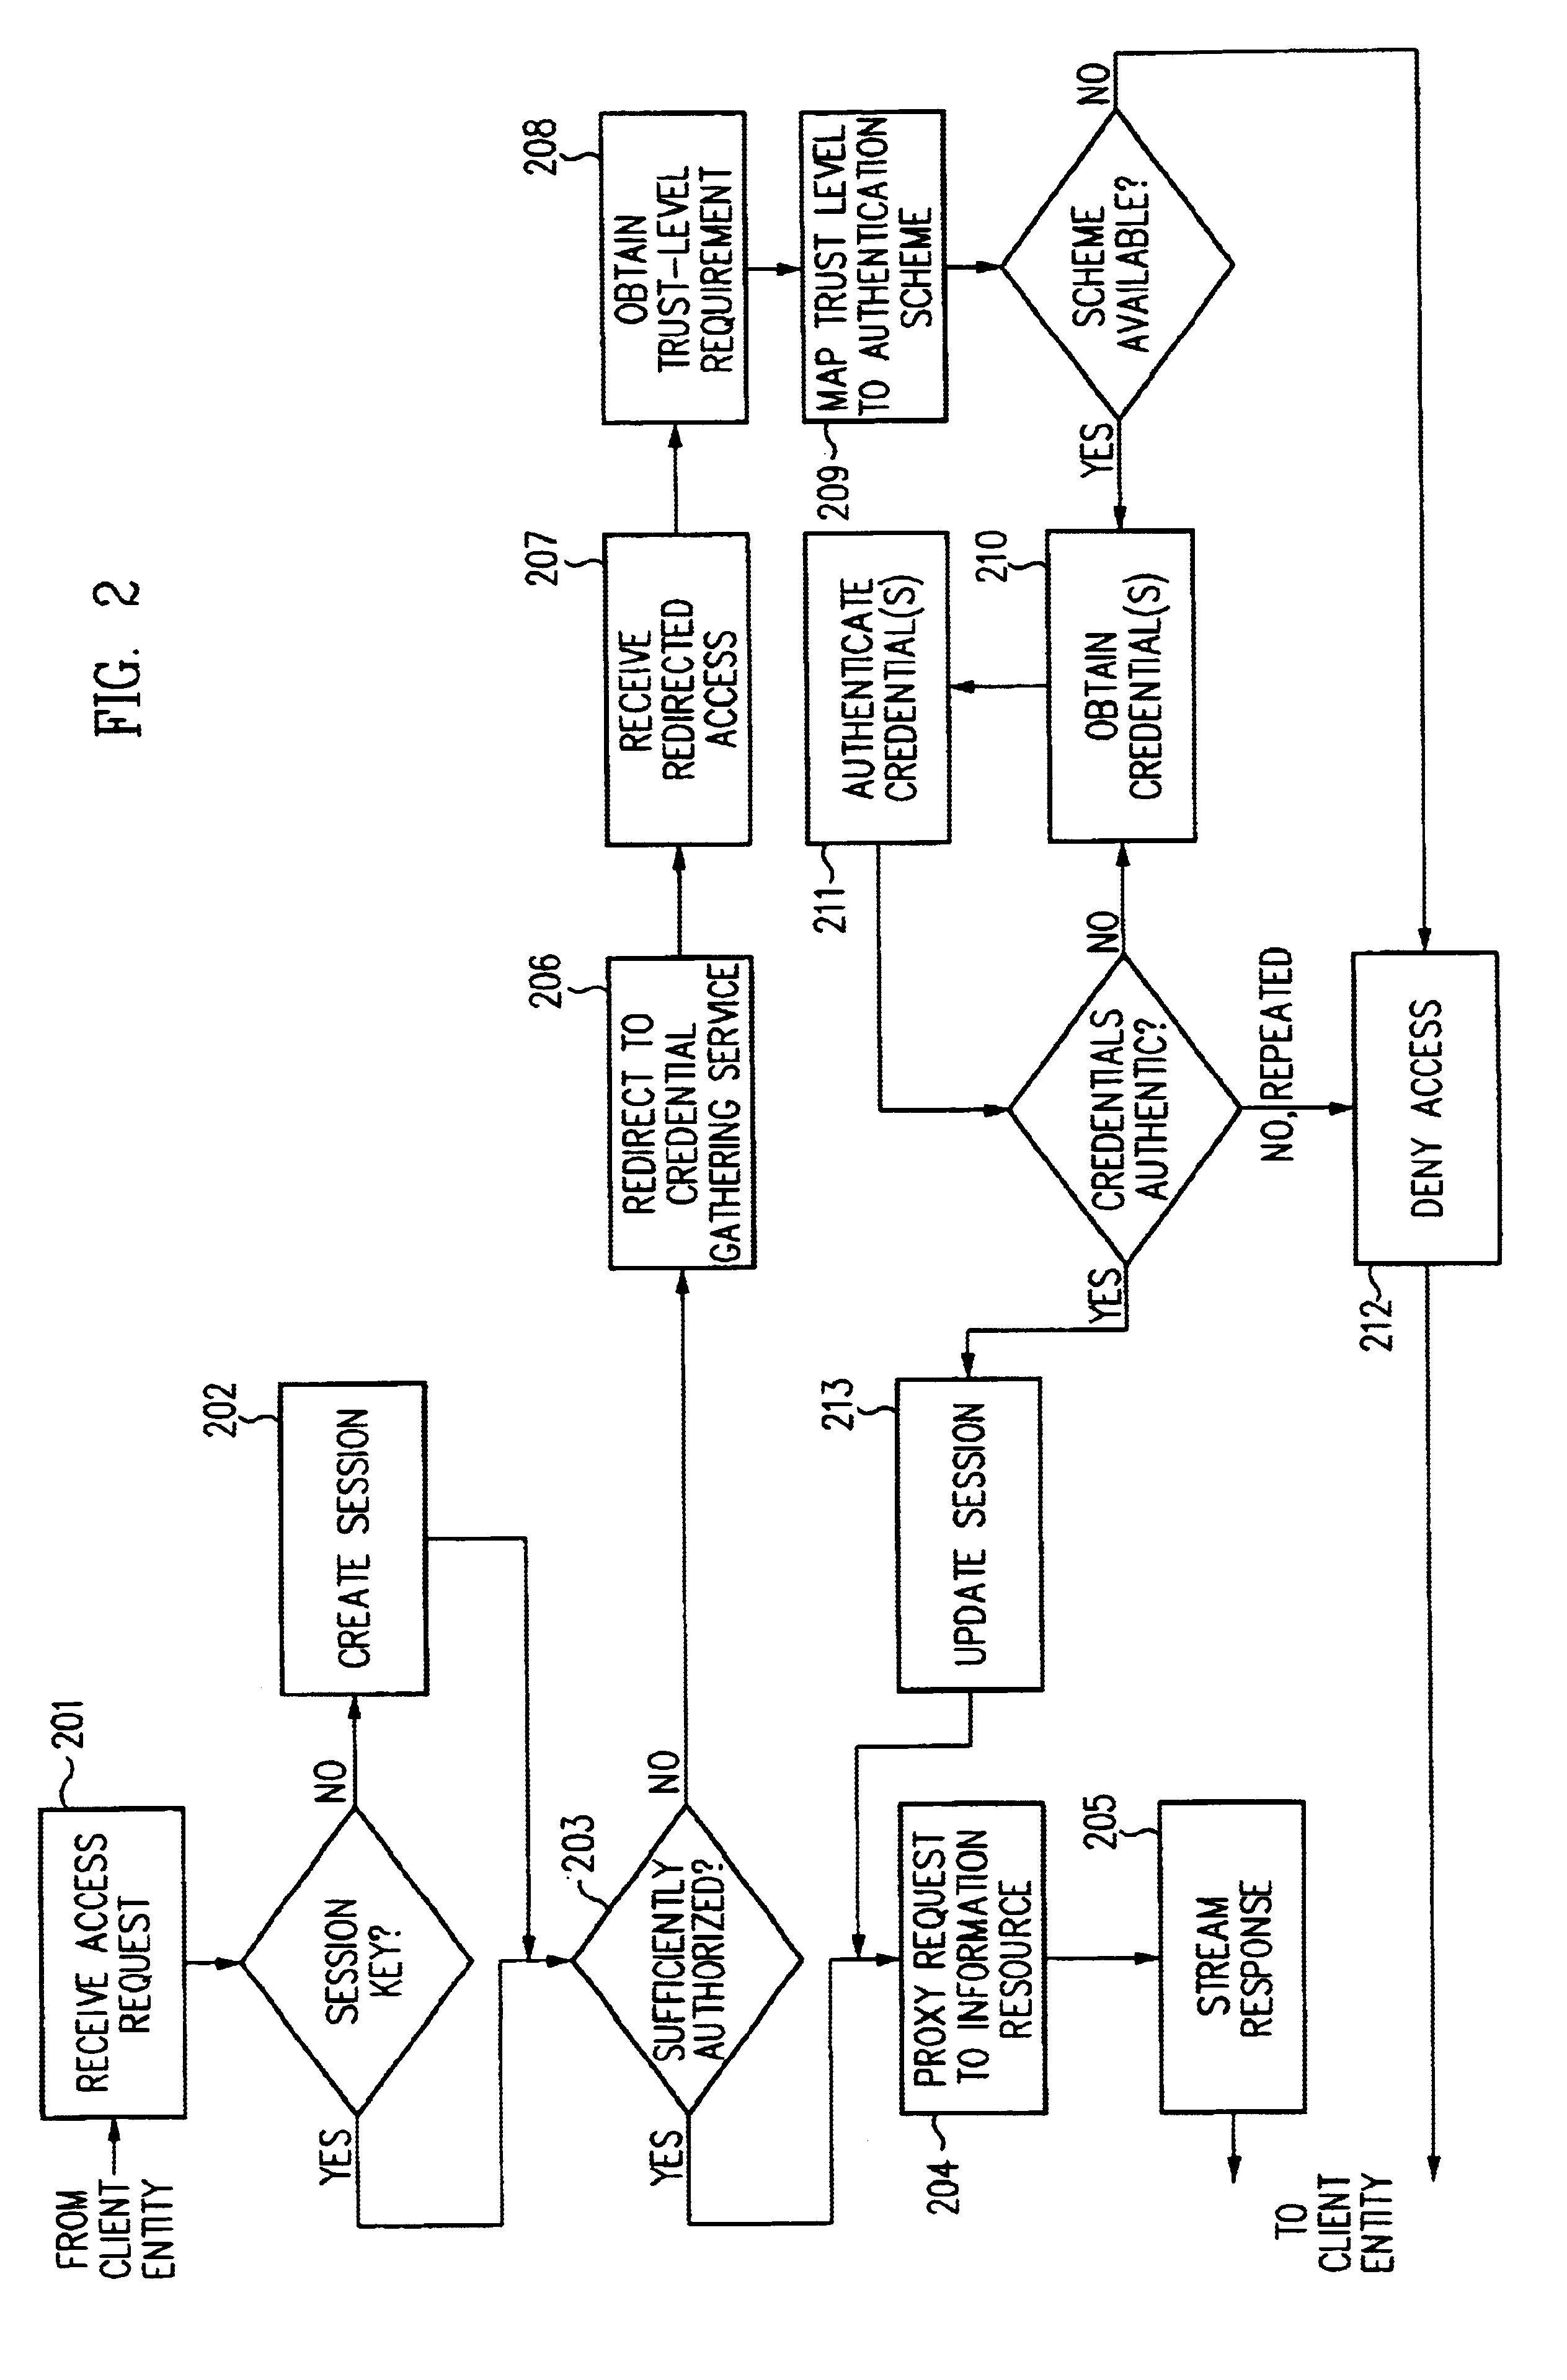 Access management system and method employing secure credentials